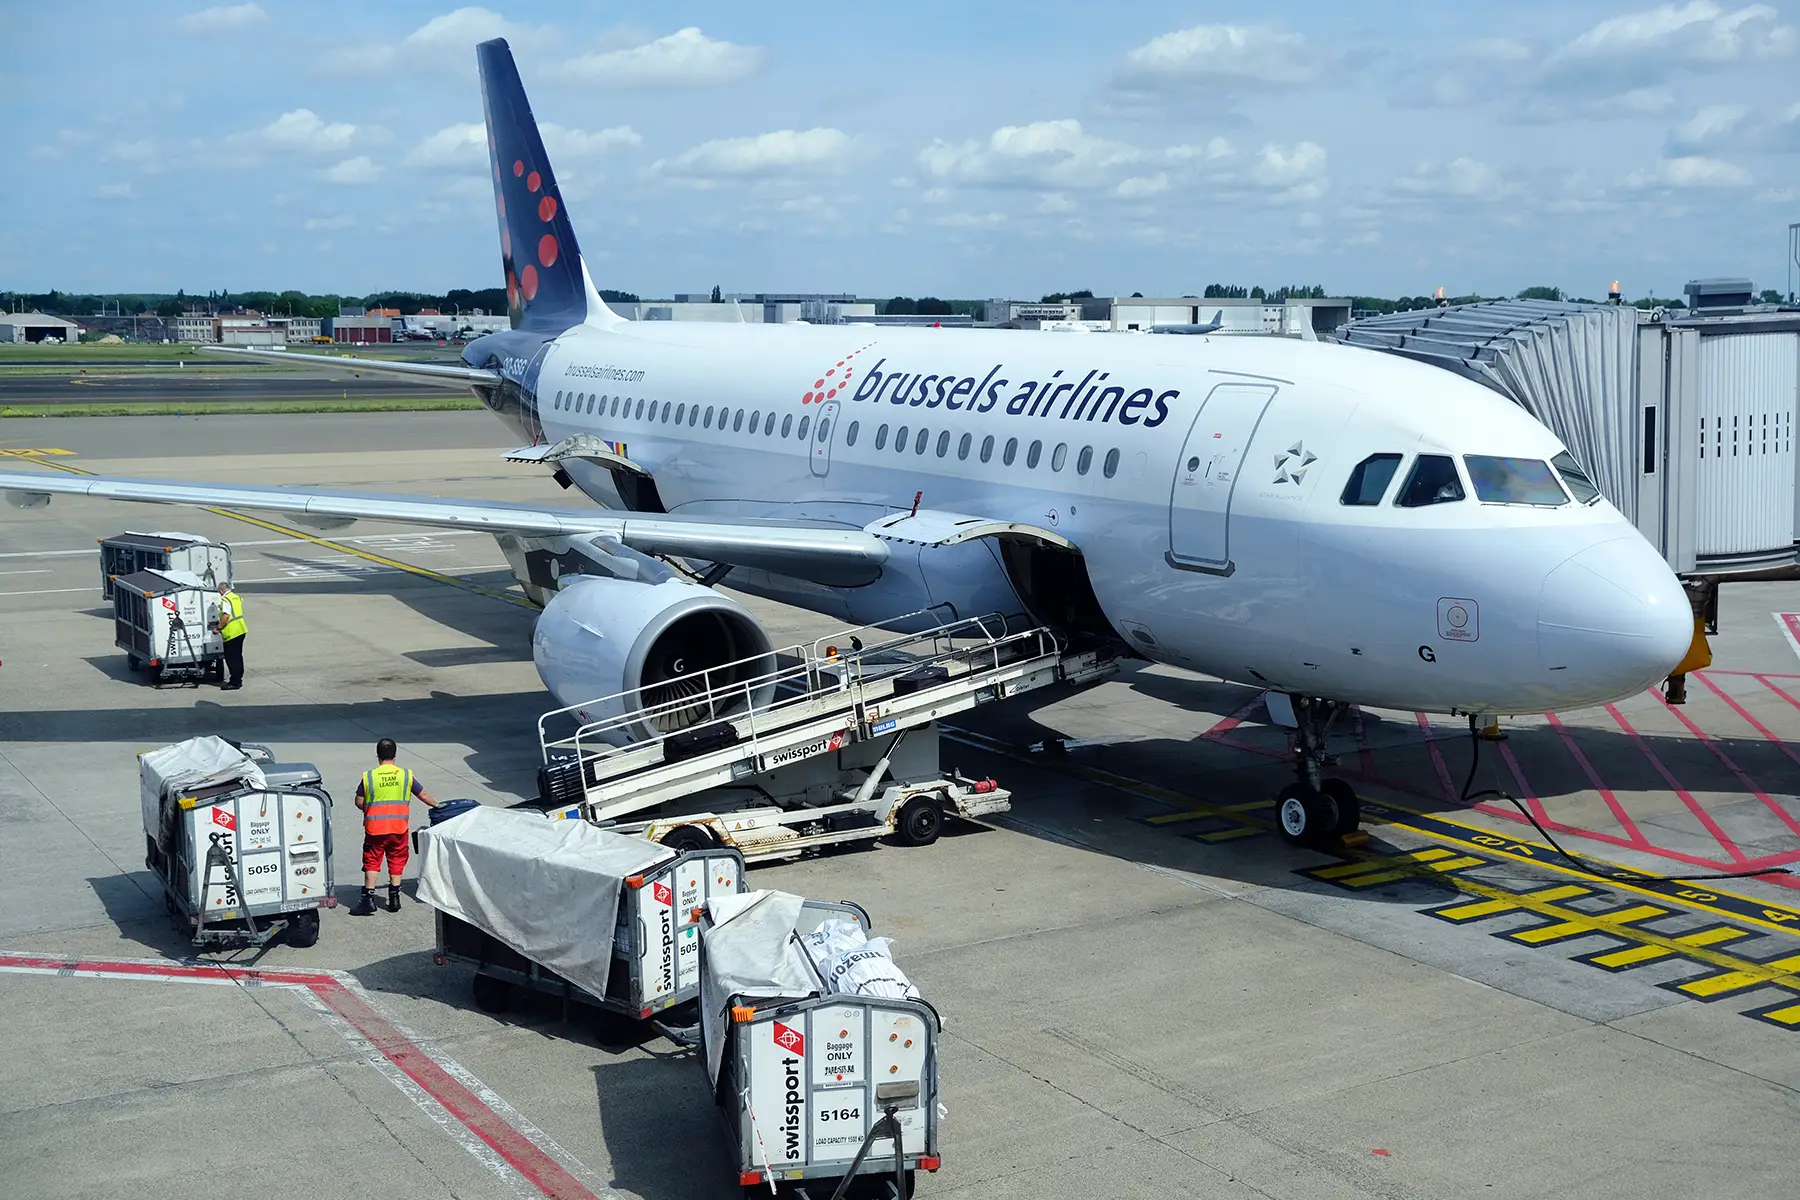 Brussels Airlines aircraft at the gate in Brussels, Belgium